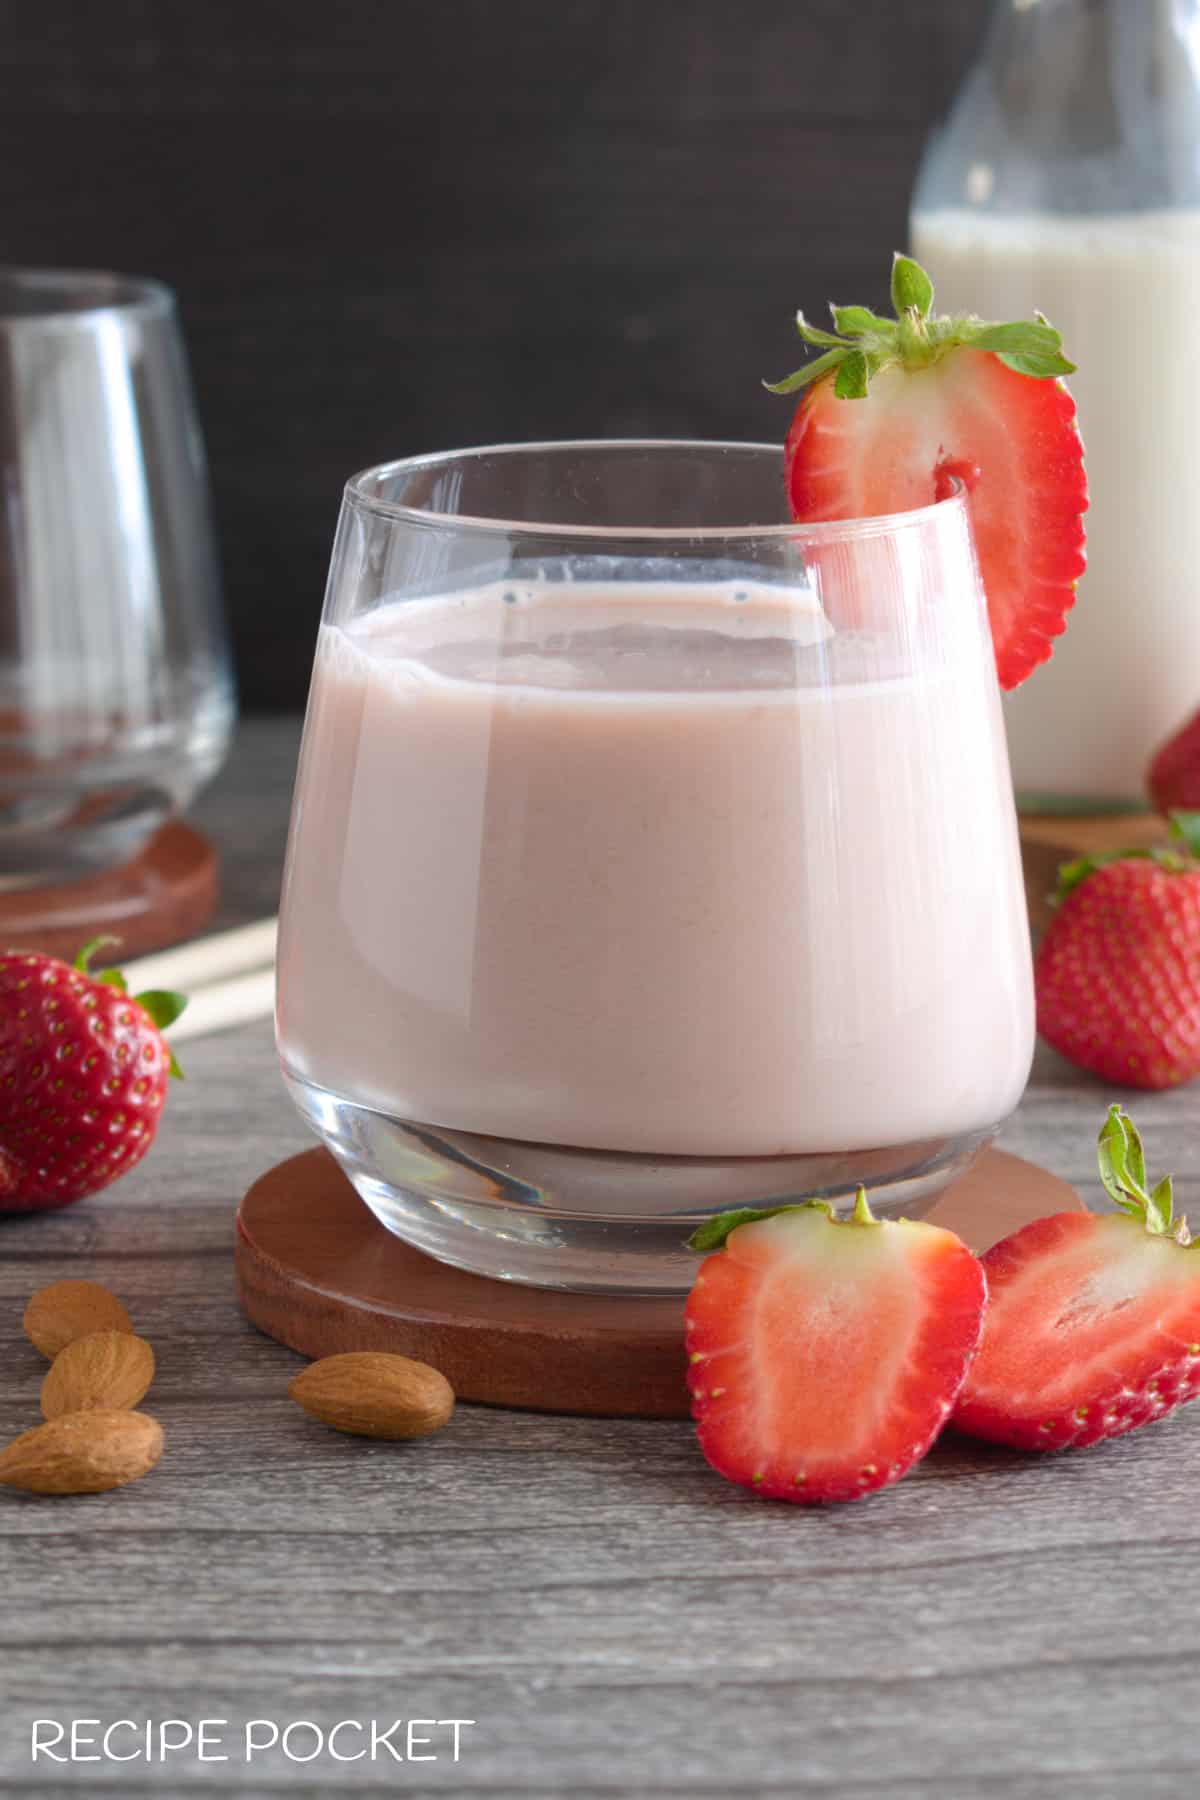 A glass of pink milk garnished with a strawberry.